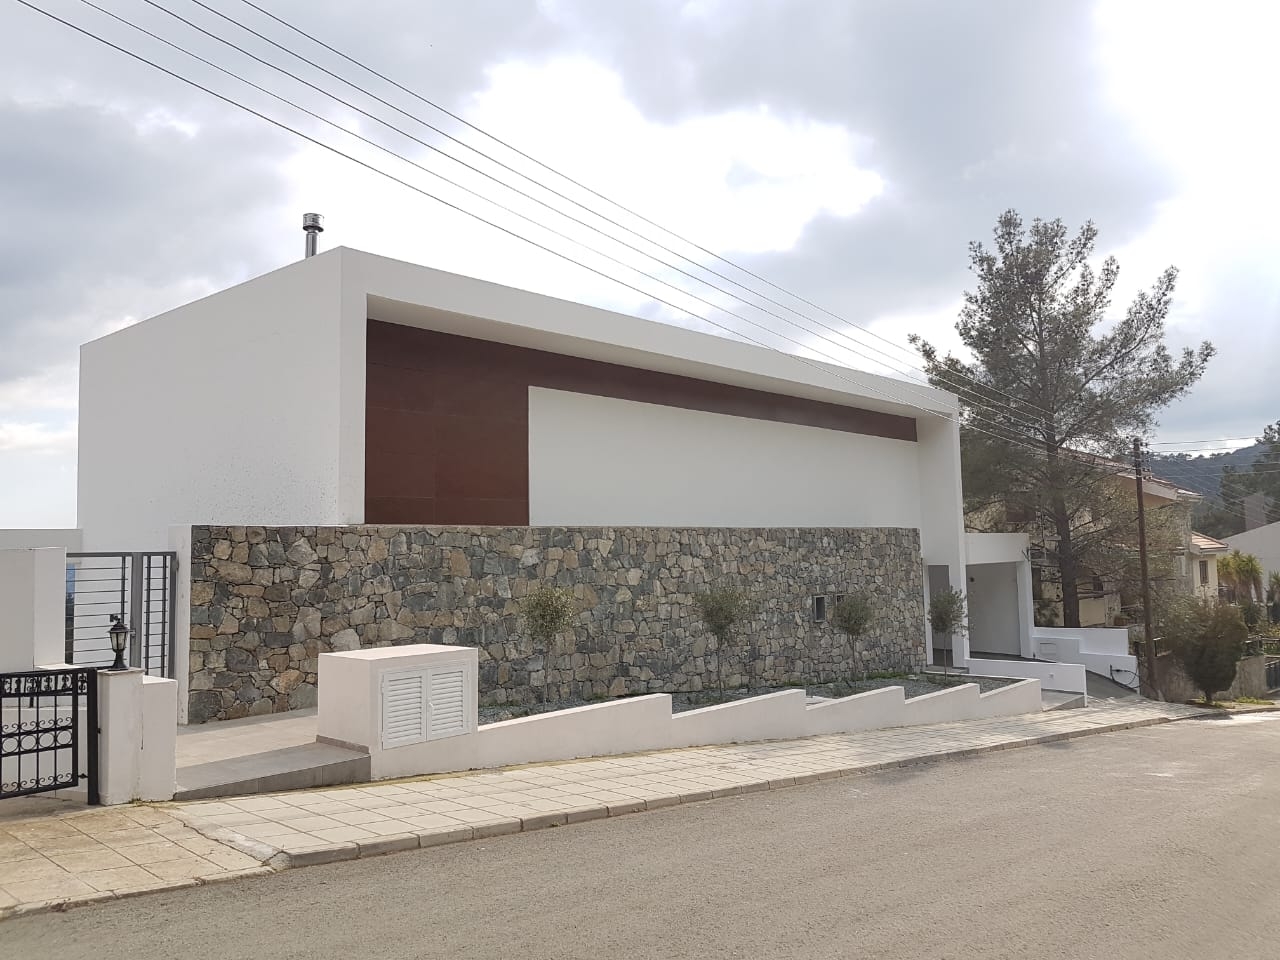 5 Bedroom House for Sale in Moniatis, Limassol District